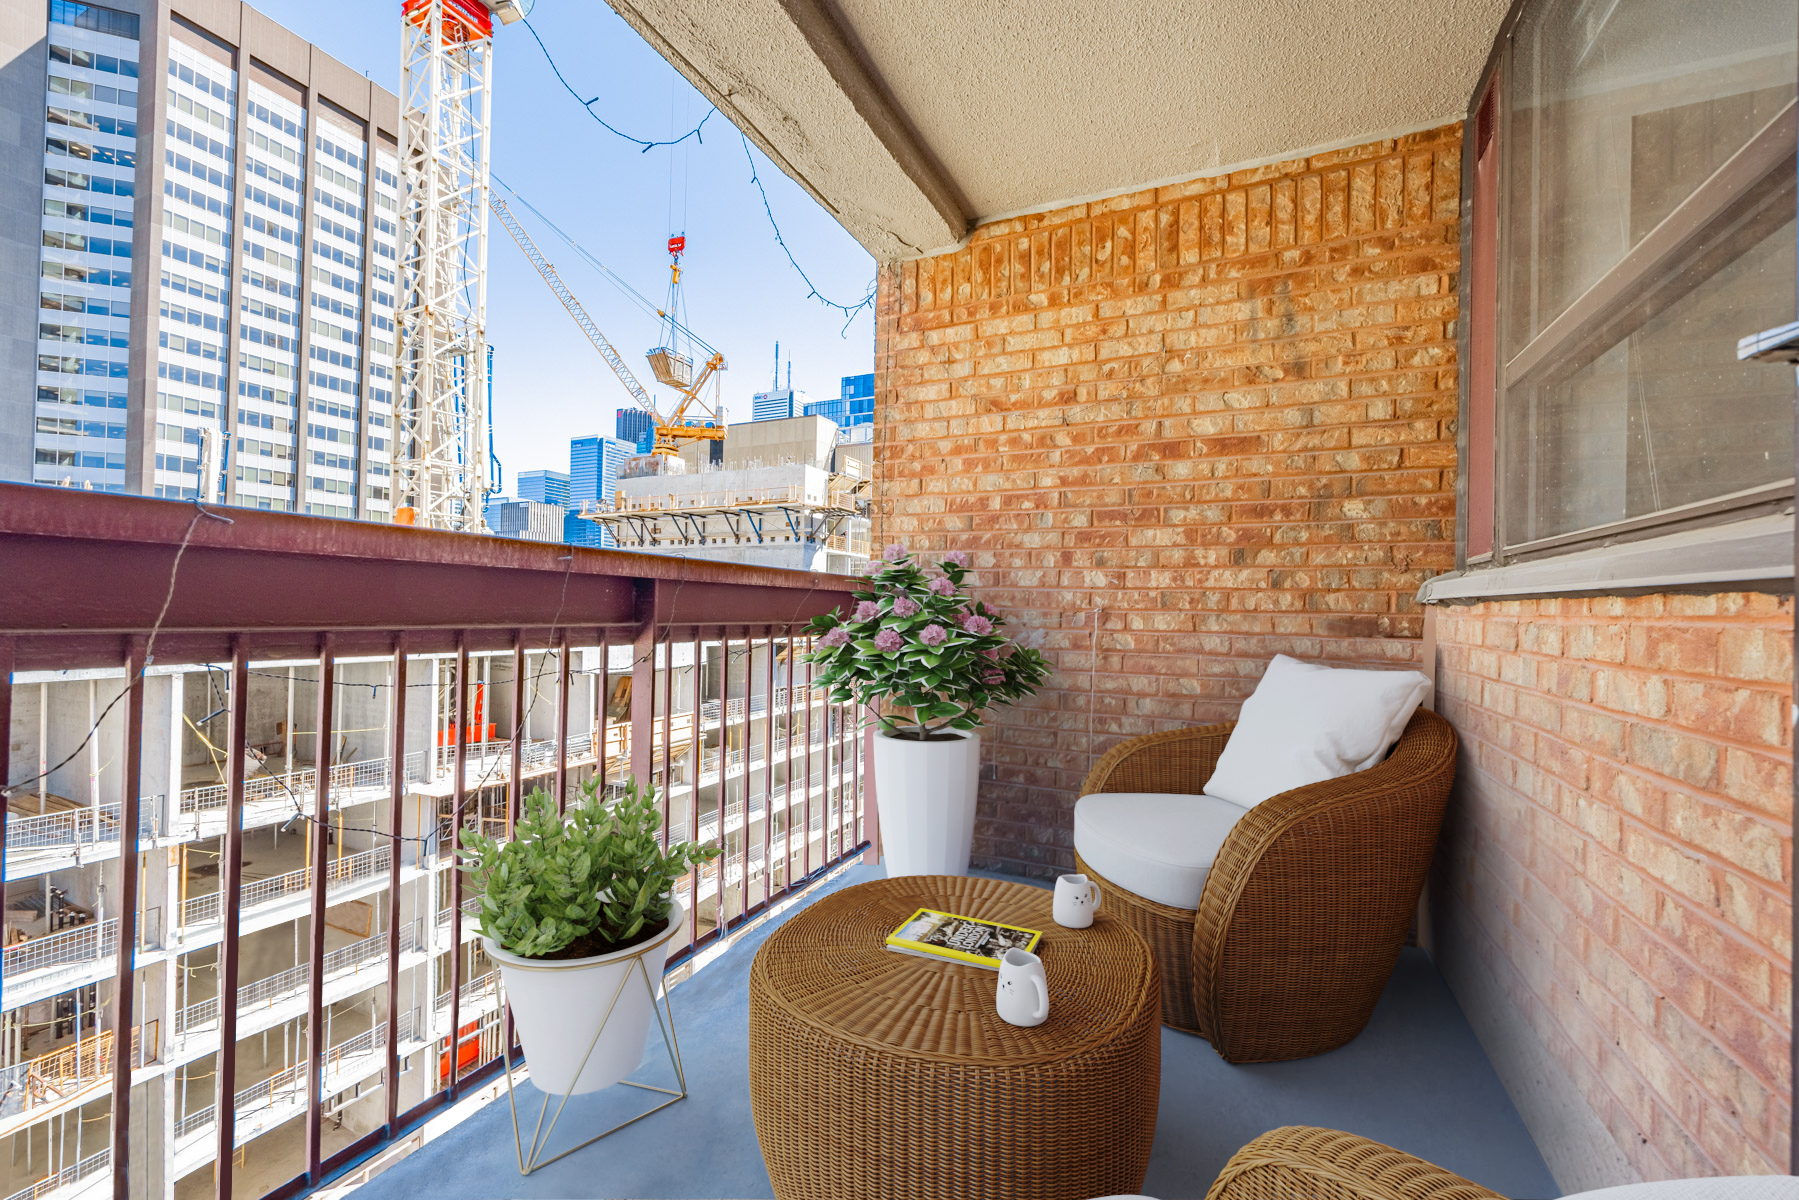 120 St Patrick Street Unit 807 balcony with red-brick wall and patio furniture.